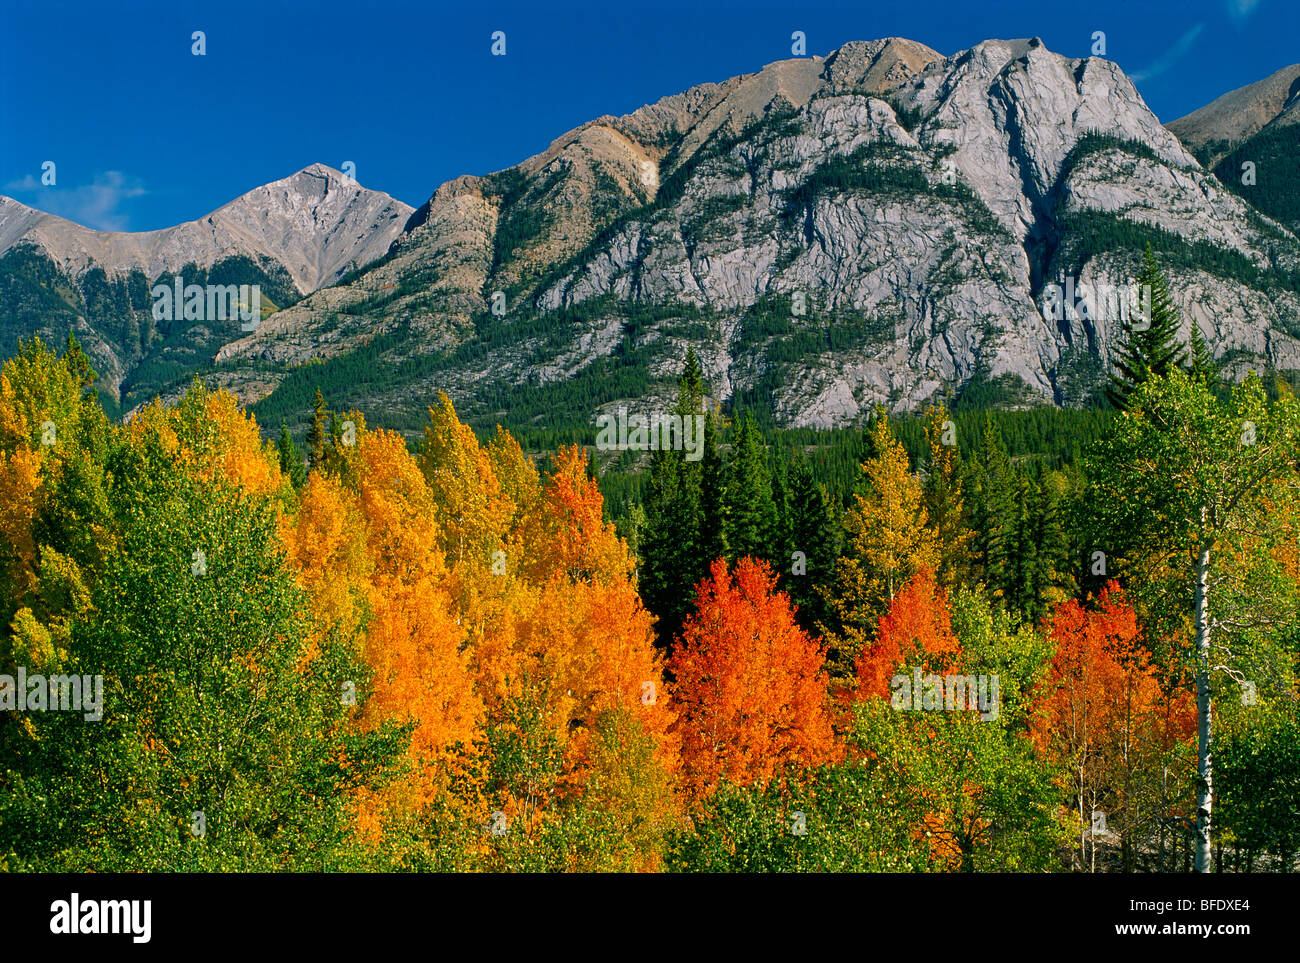 Autumn colors in the Canadian Rocky Mountains along the David Thompson Highway, Alberta, Canada Stock Photo